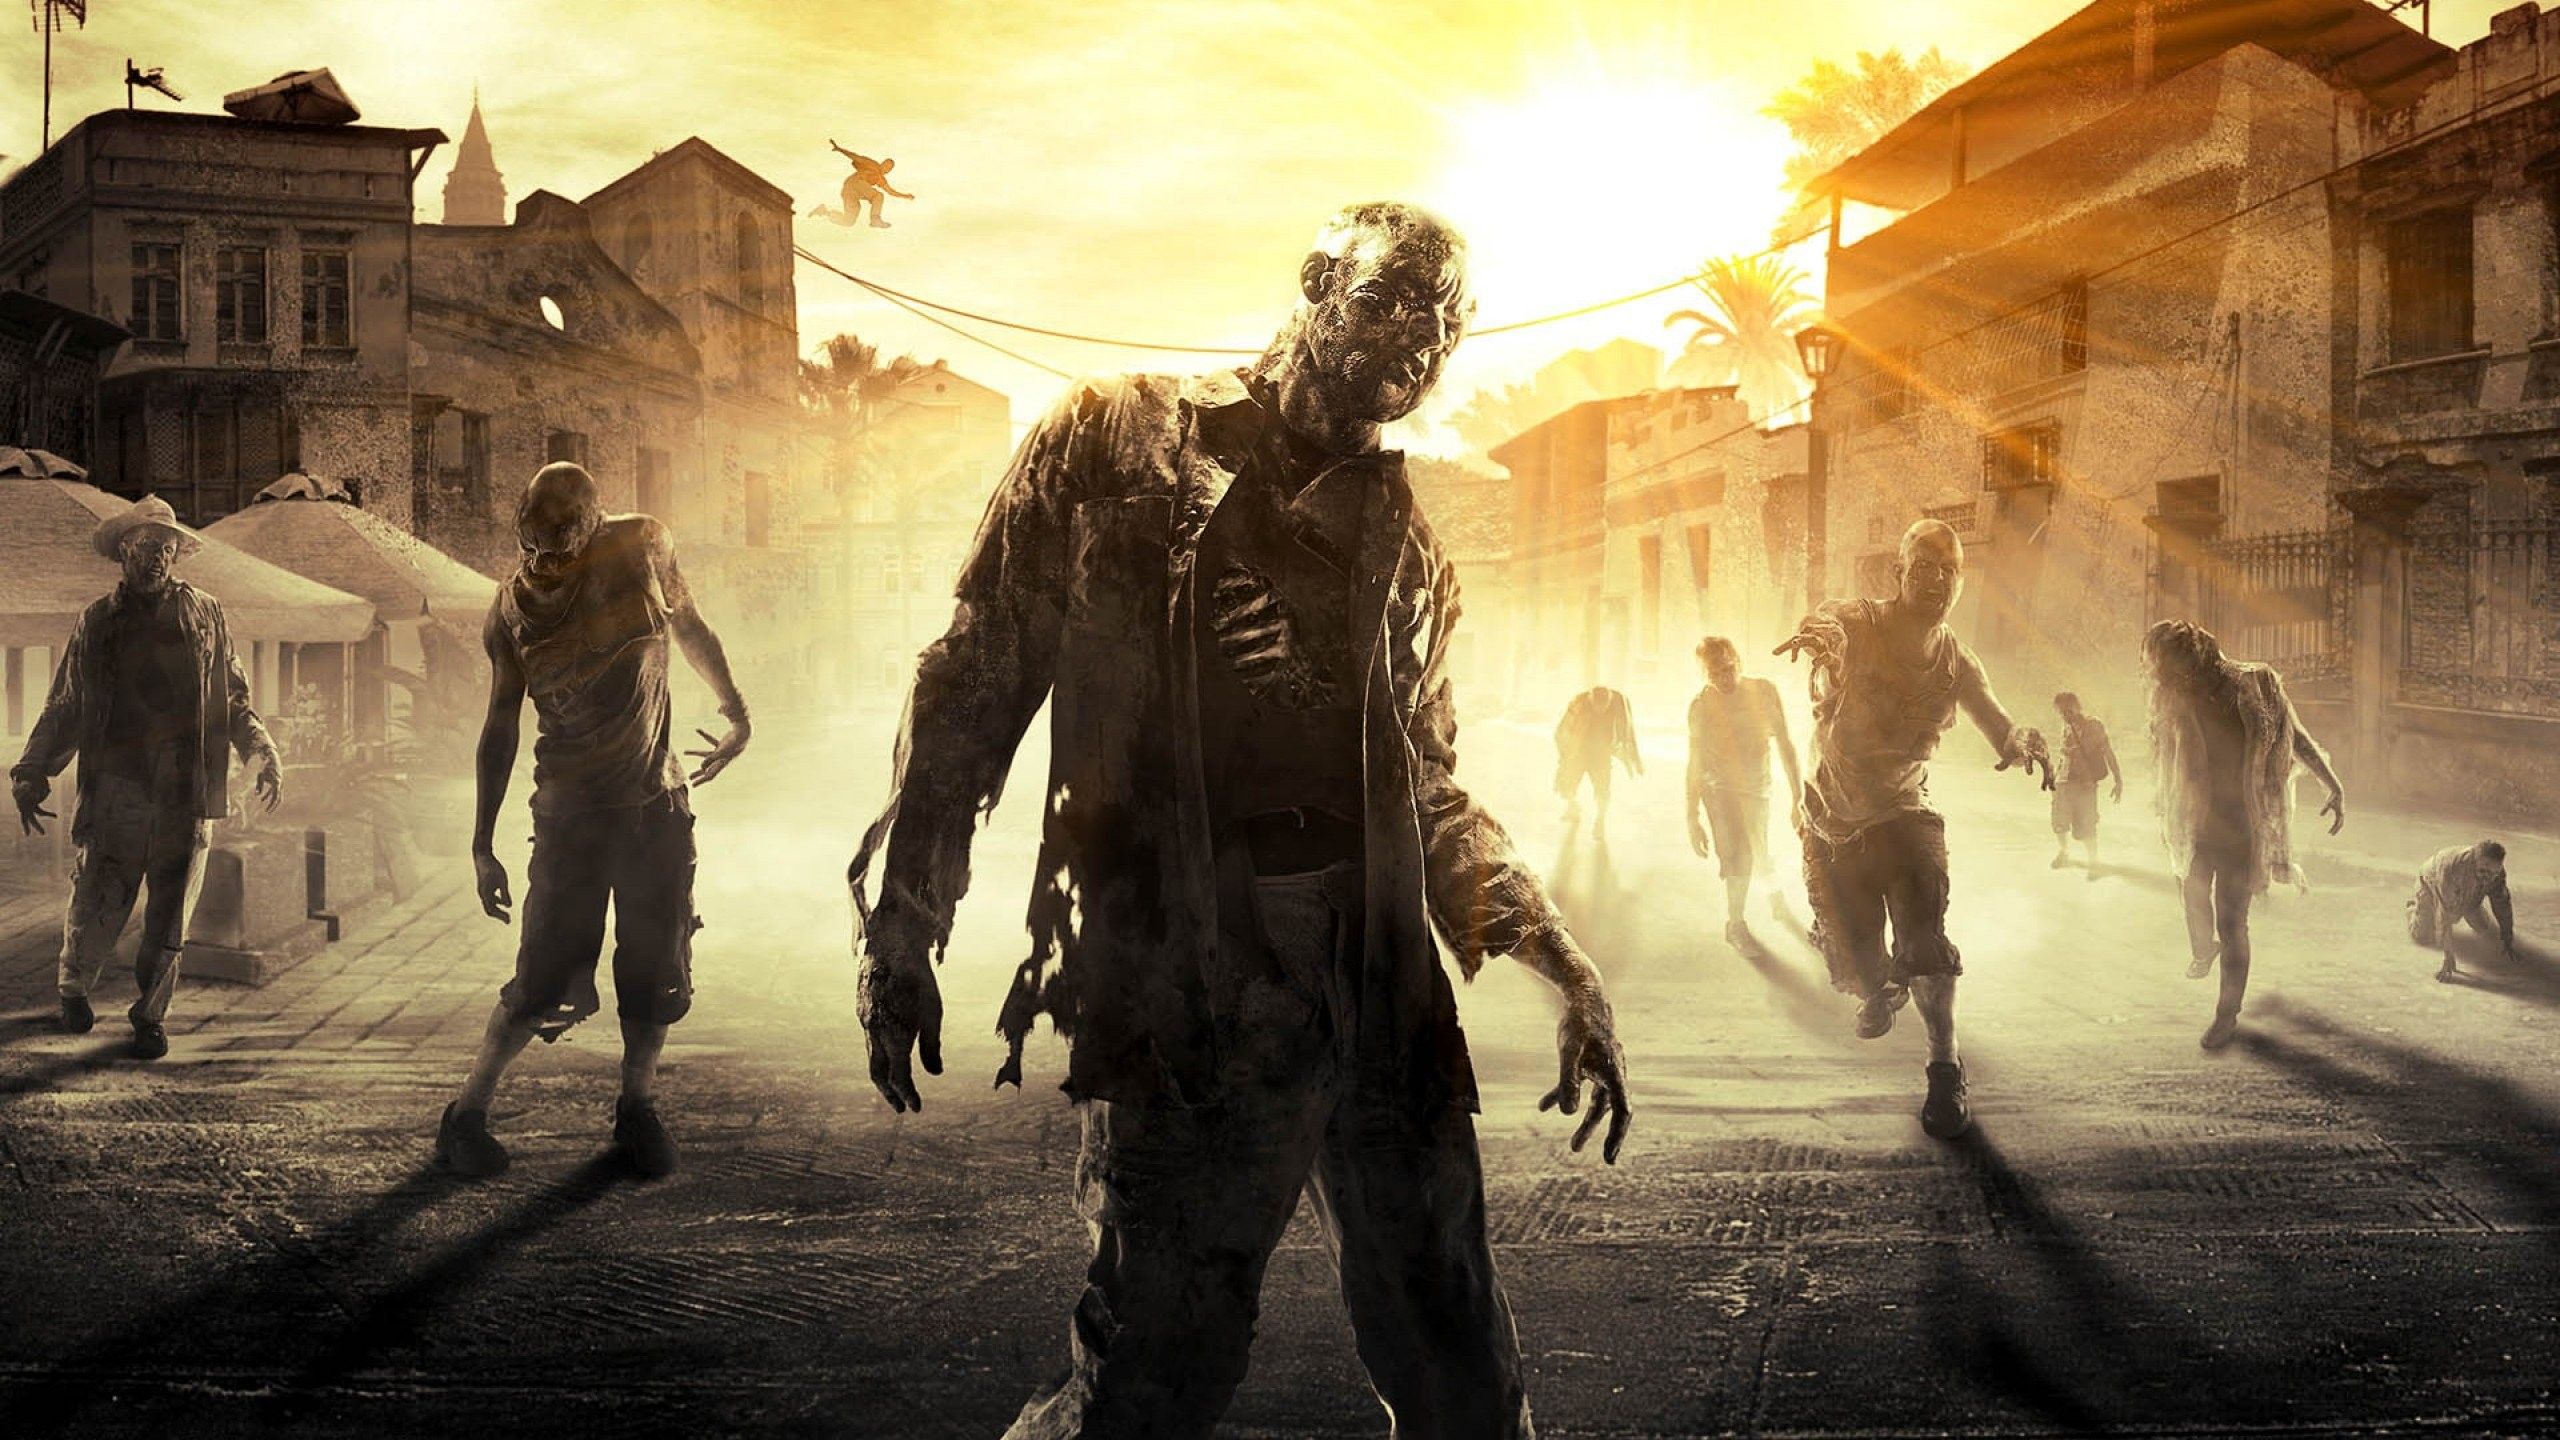 Cool Zombie Wallpapers 59 images